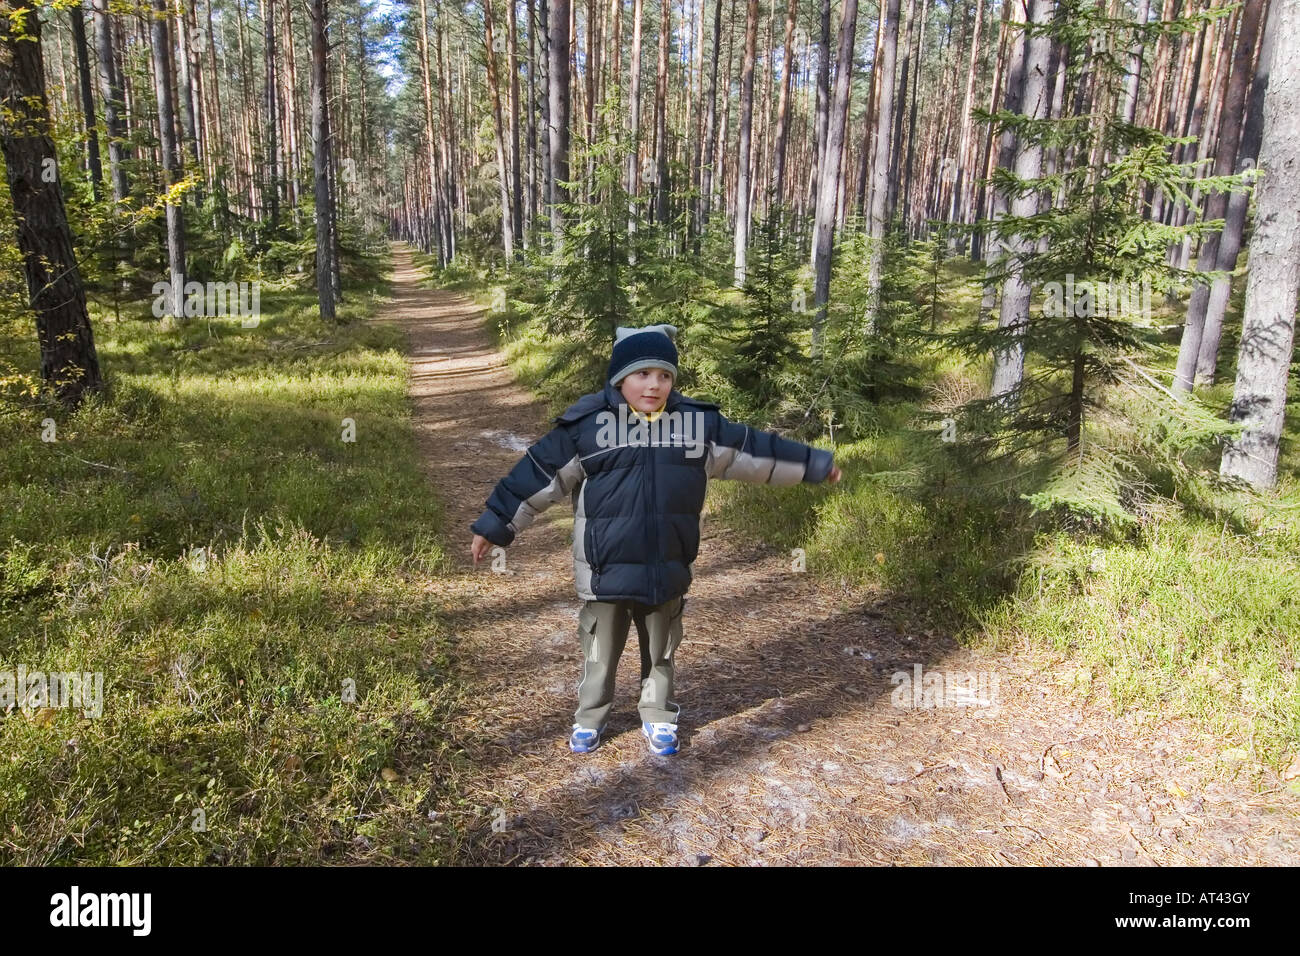 Play in the forest, Young boy walking on nature path Stock Photo